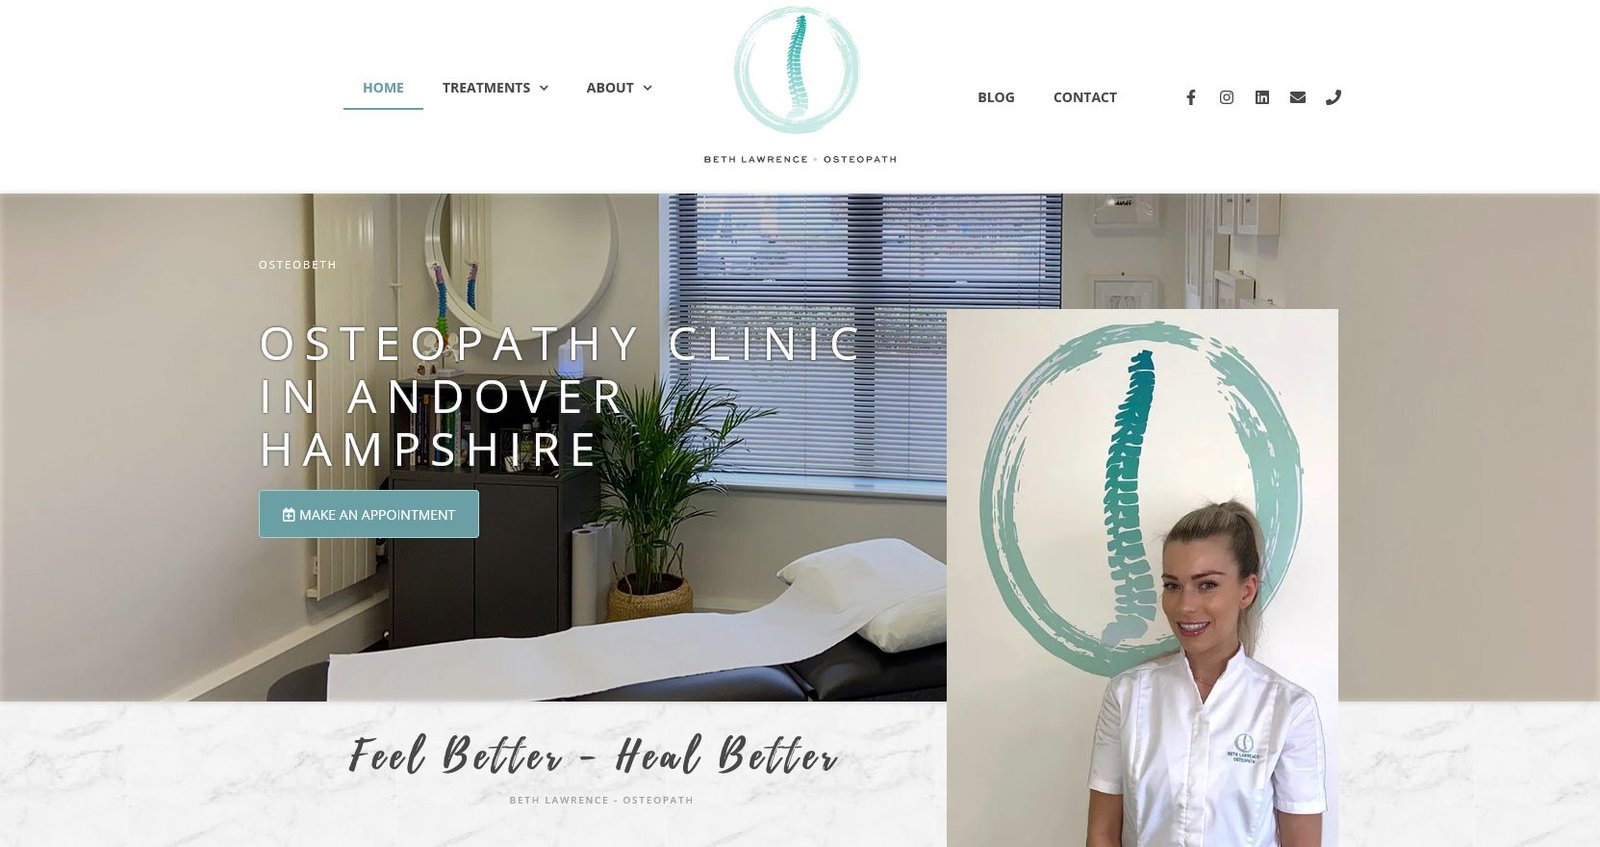 wordpress website design example - Osteobeth osteopathy clinic in Andover by Ian Middleton - wordpress website designer in the UK